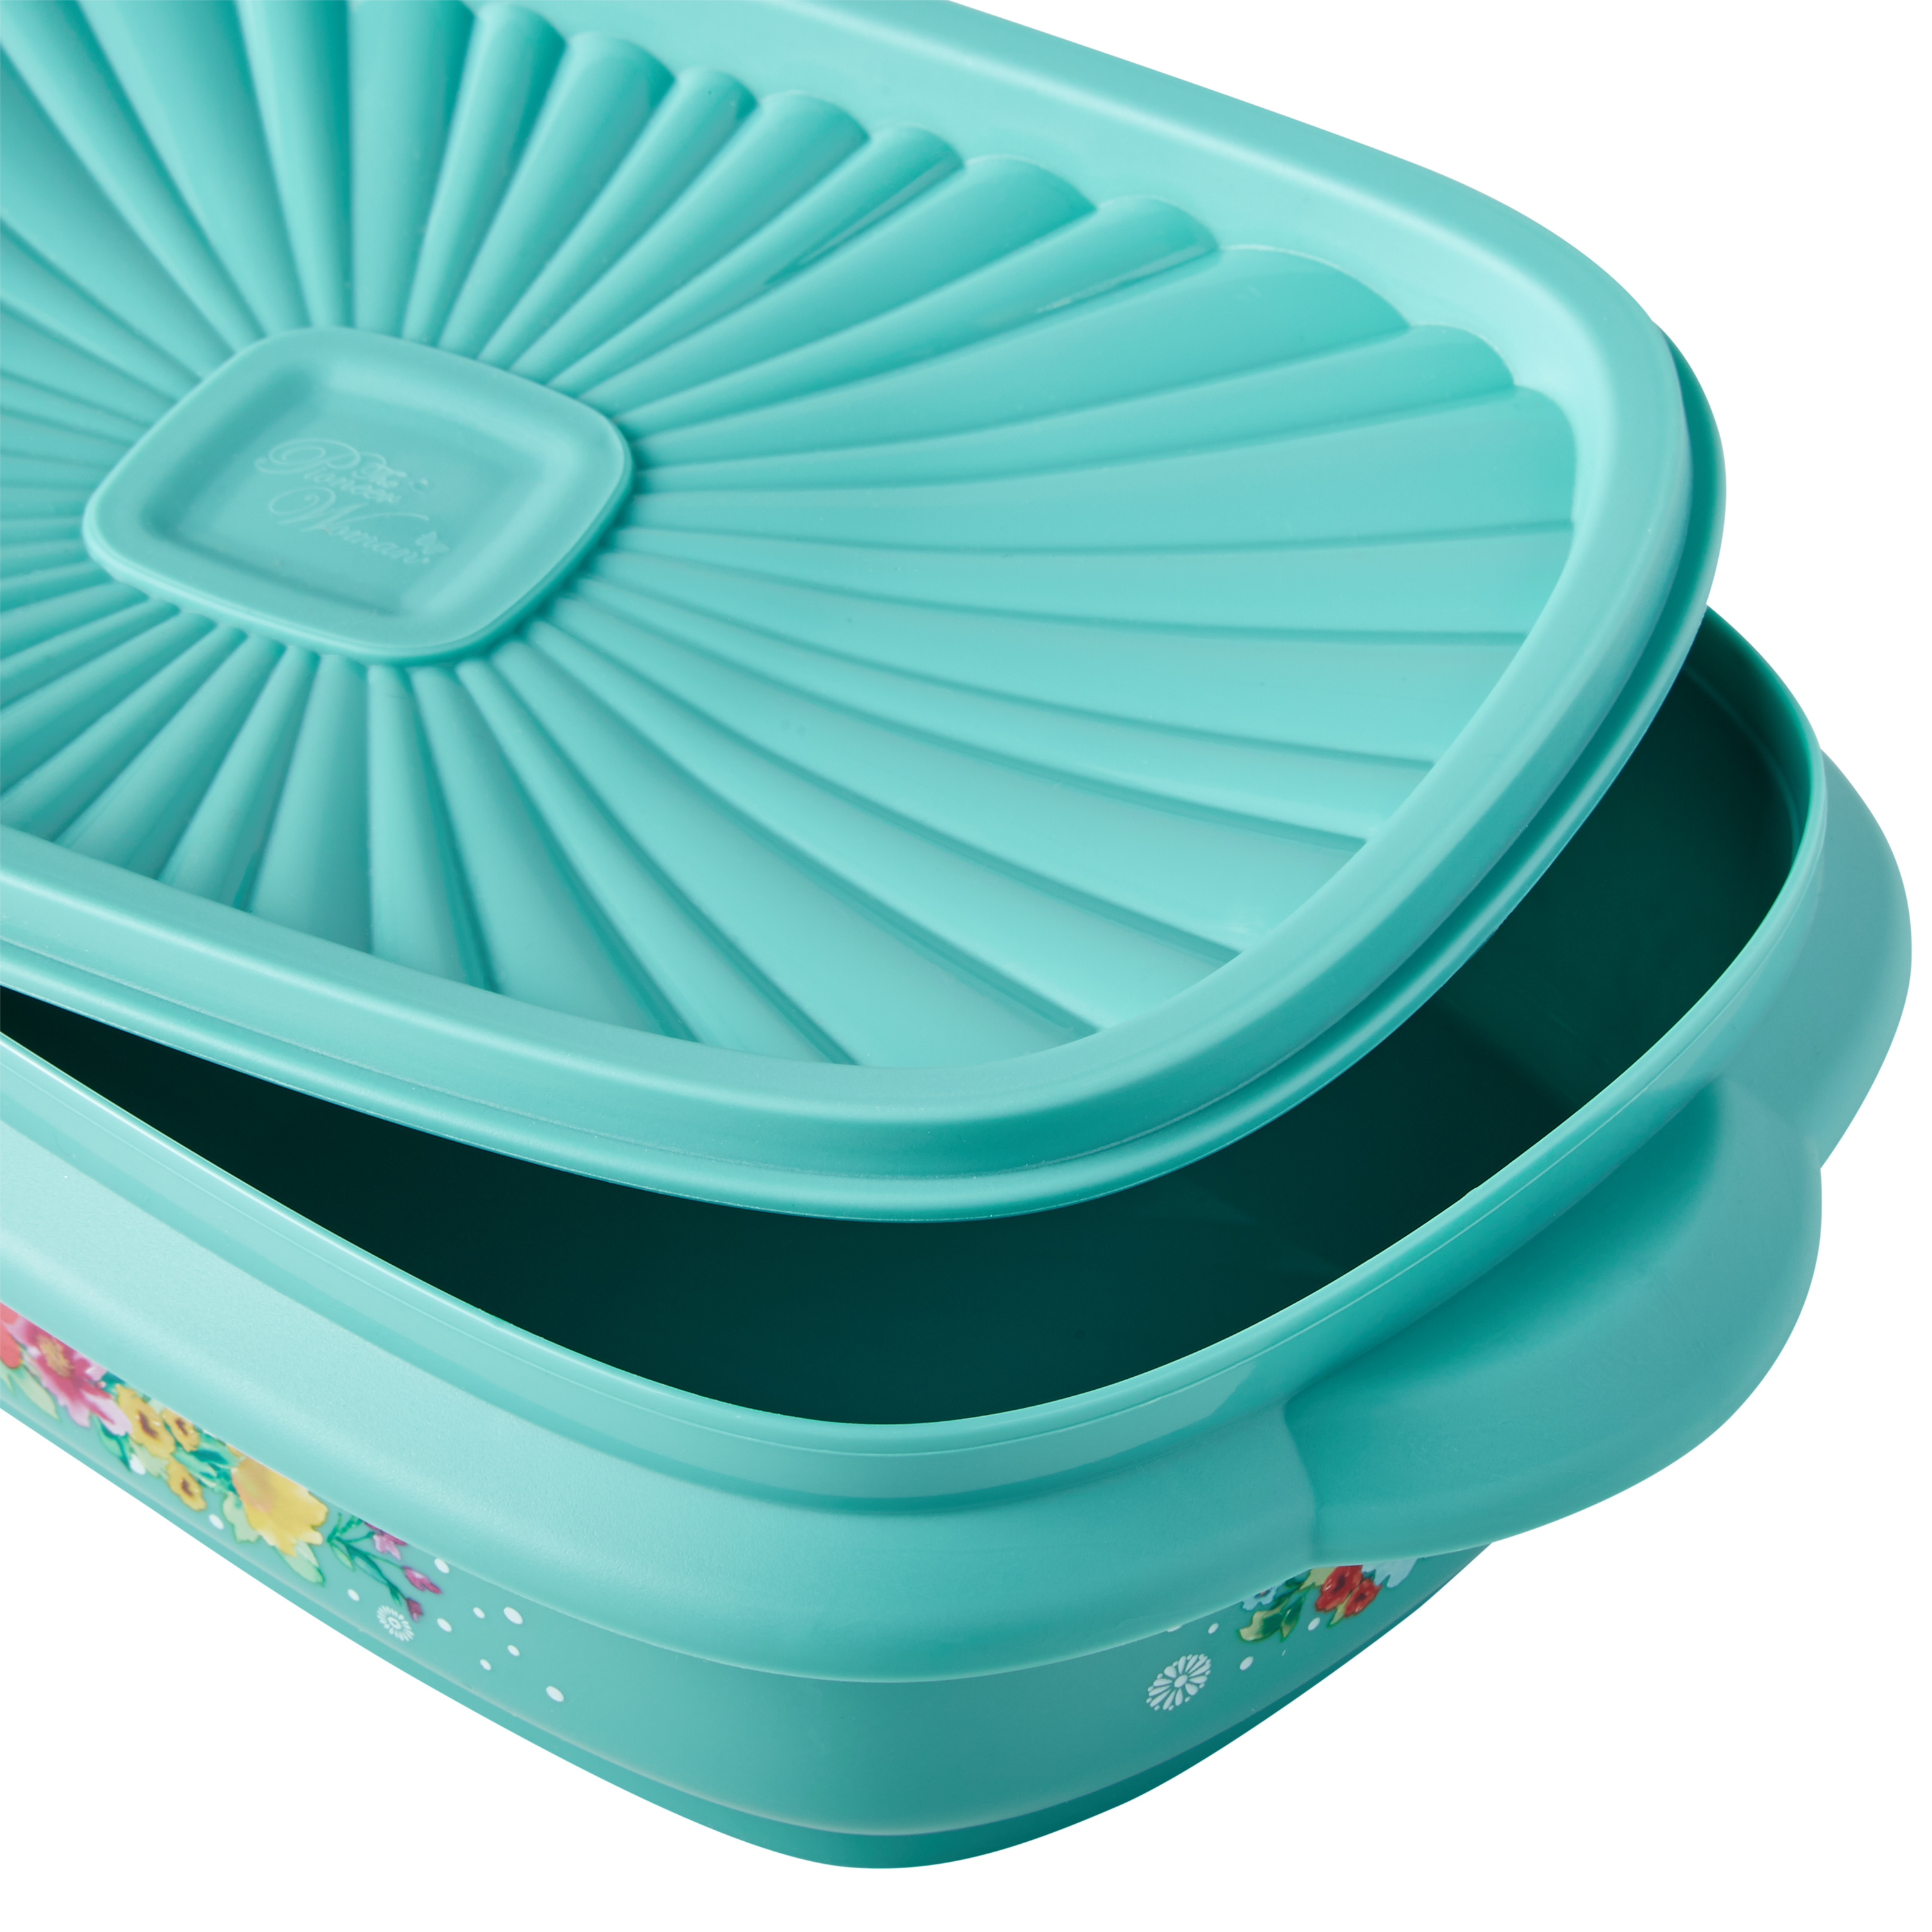 The Pioneer Woman 20 Piece Plastic Food Storage Container Variety Set, Breezy Blossom - image 5 of 5